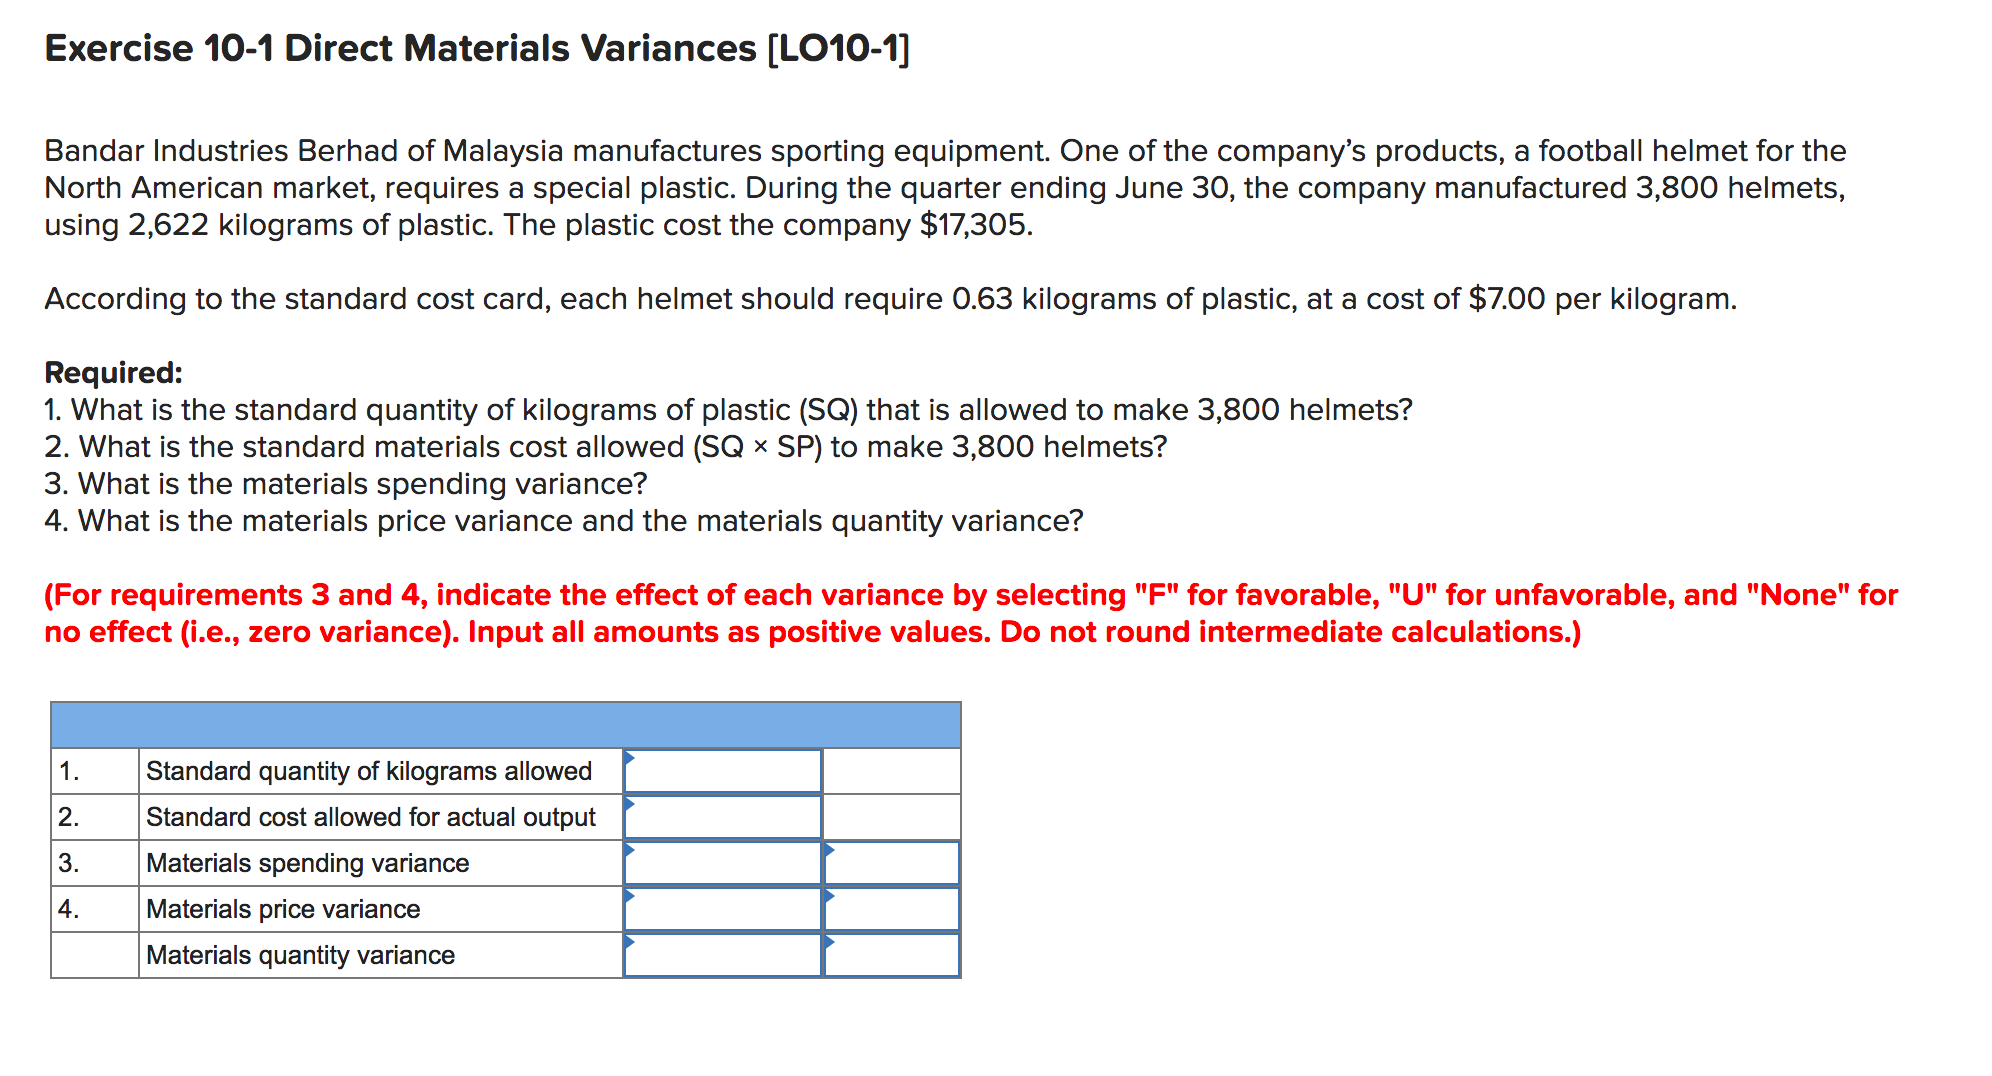 reasons for material price variance